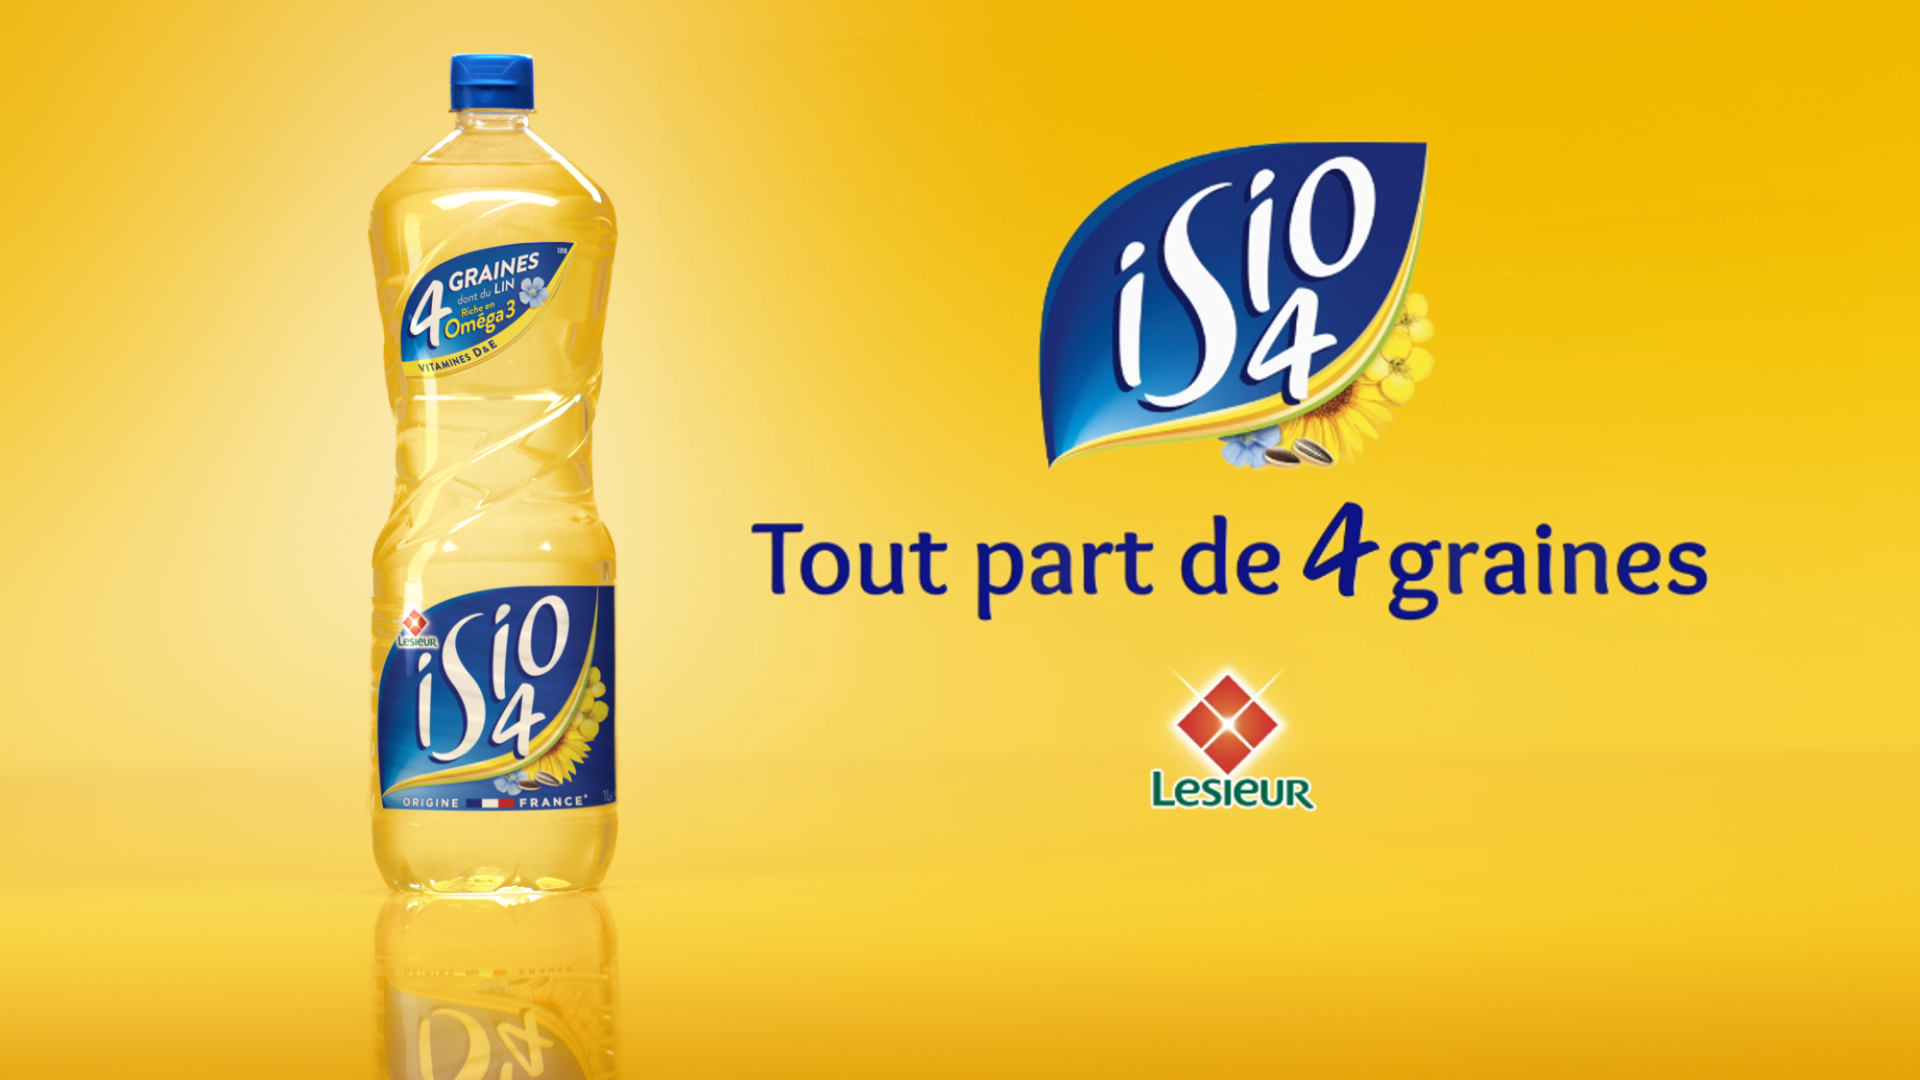 ISIO 4 - Campagne TV - Lesieur / Isio 4/ Puget - VMLY&R - agence Publicité  / communication / 360